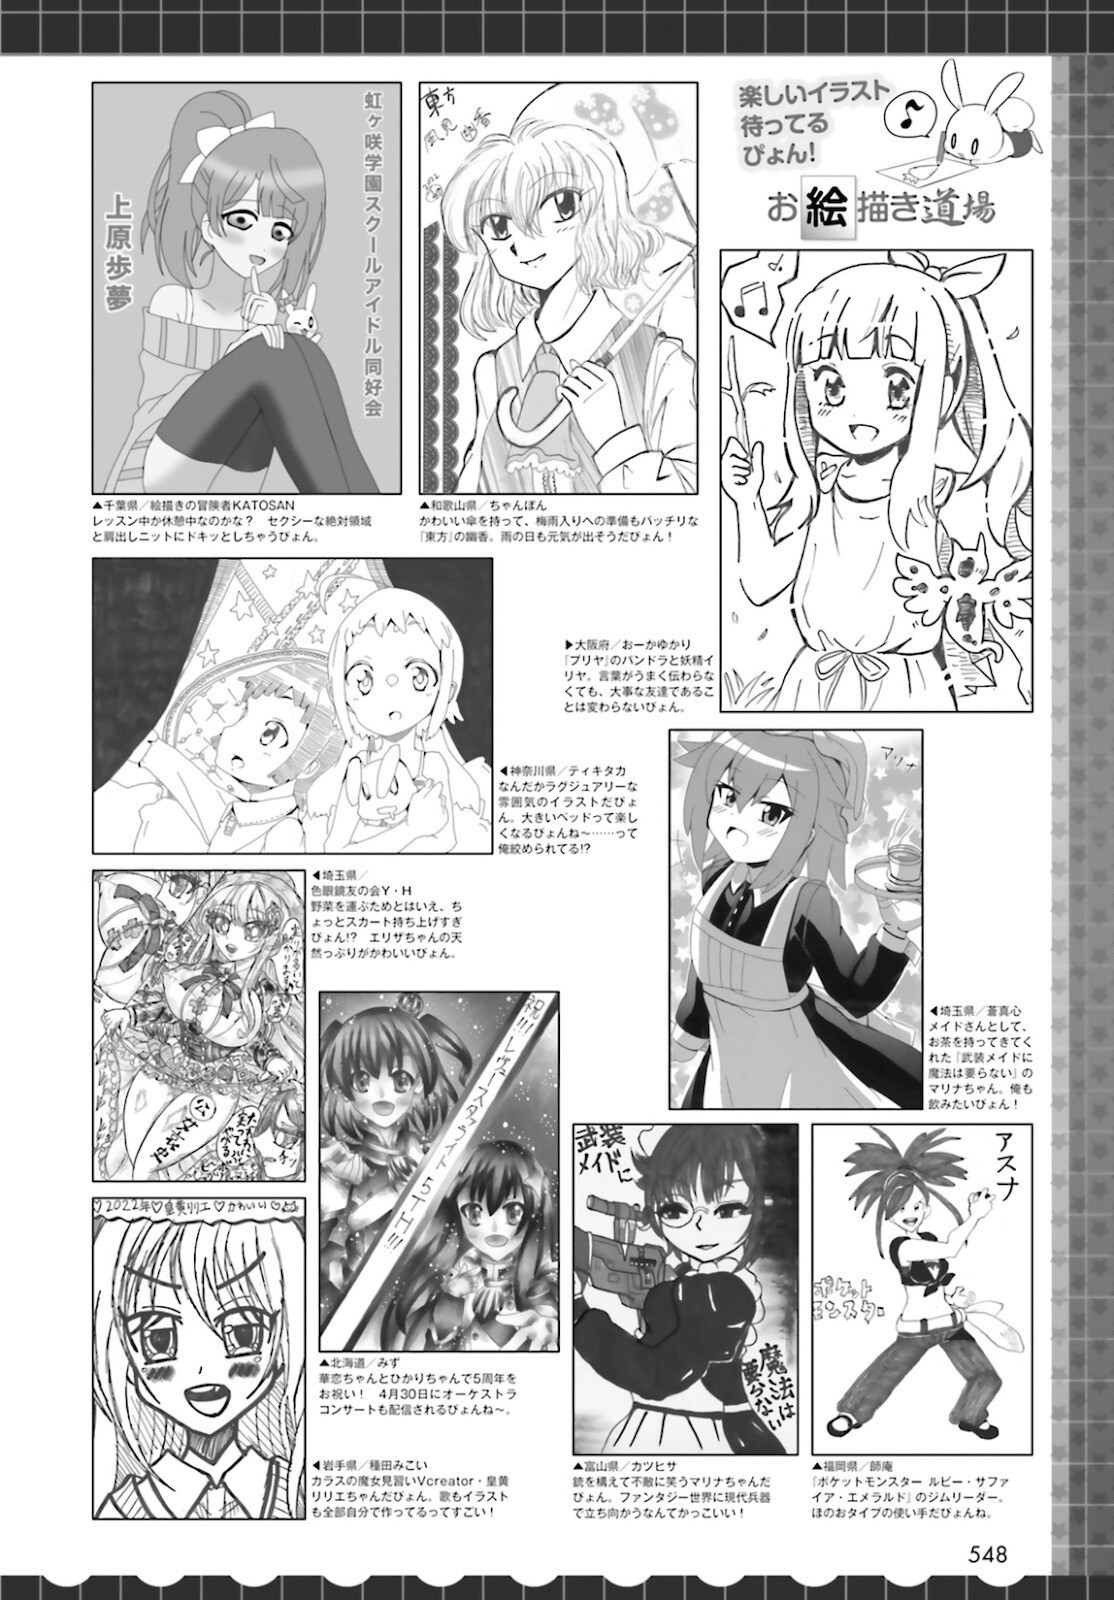 Comp Ace - Chapter 2022-06 - Page 536